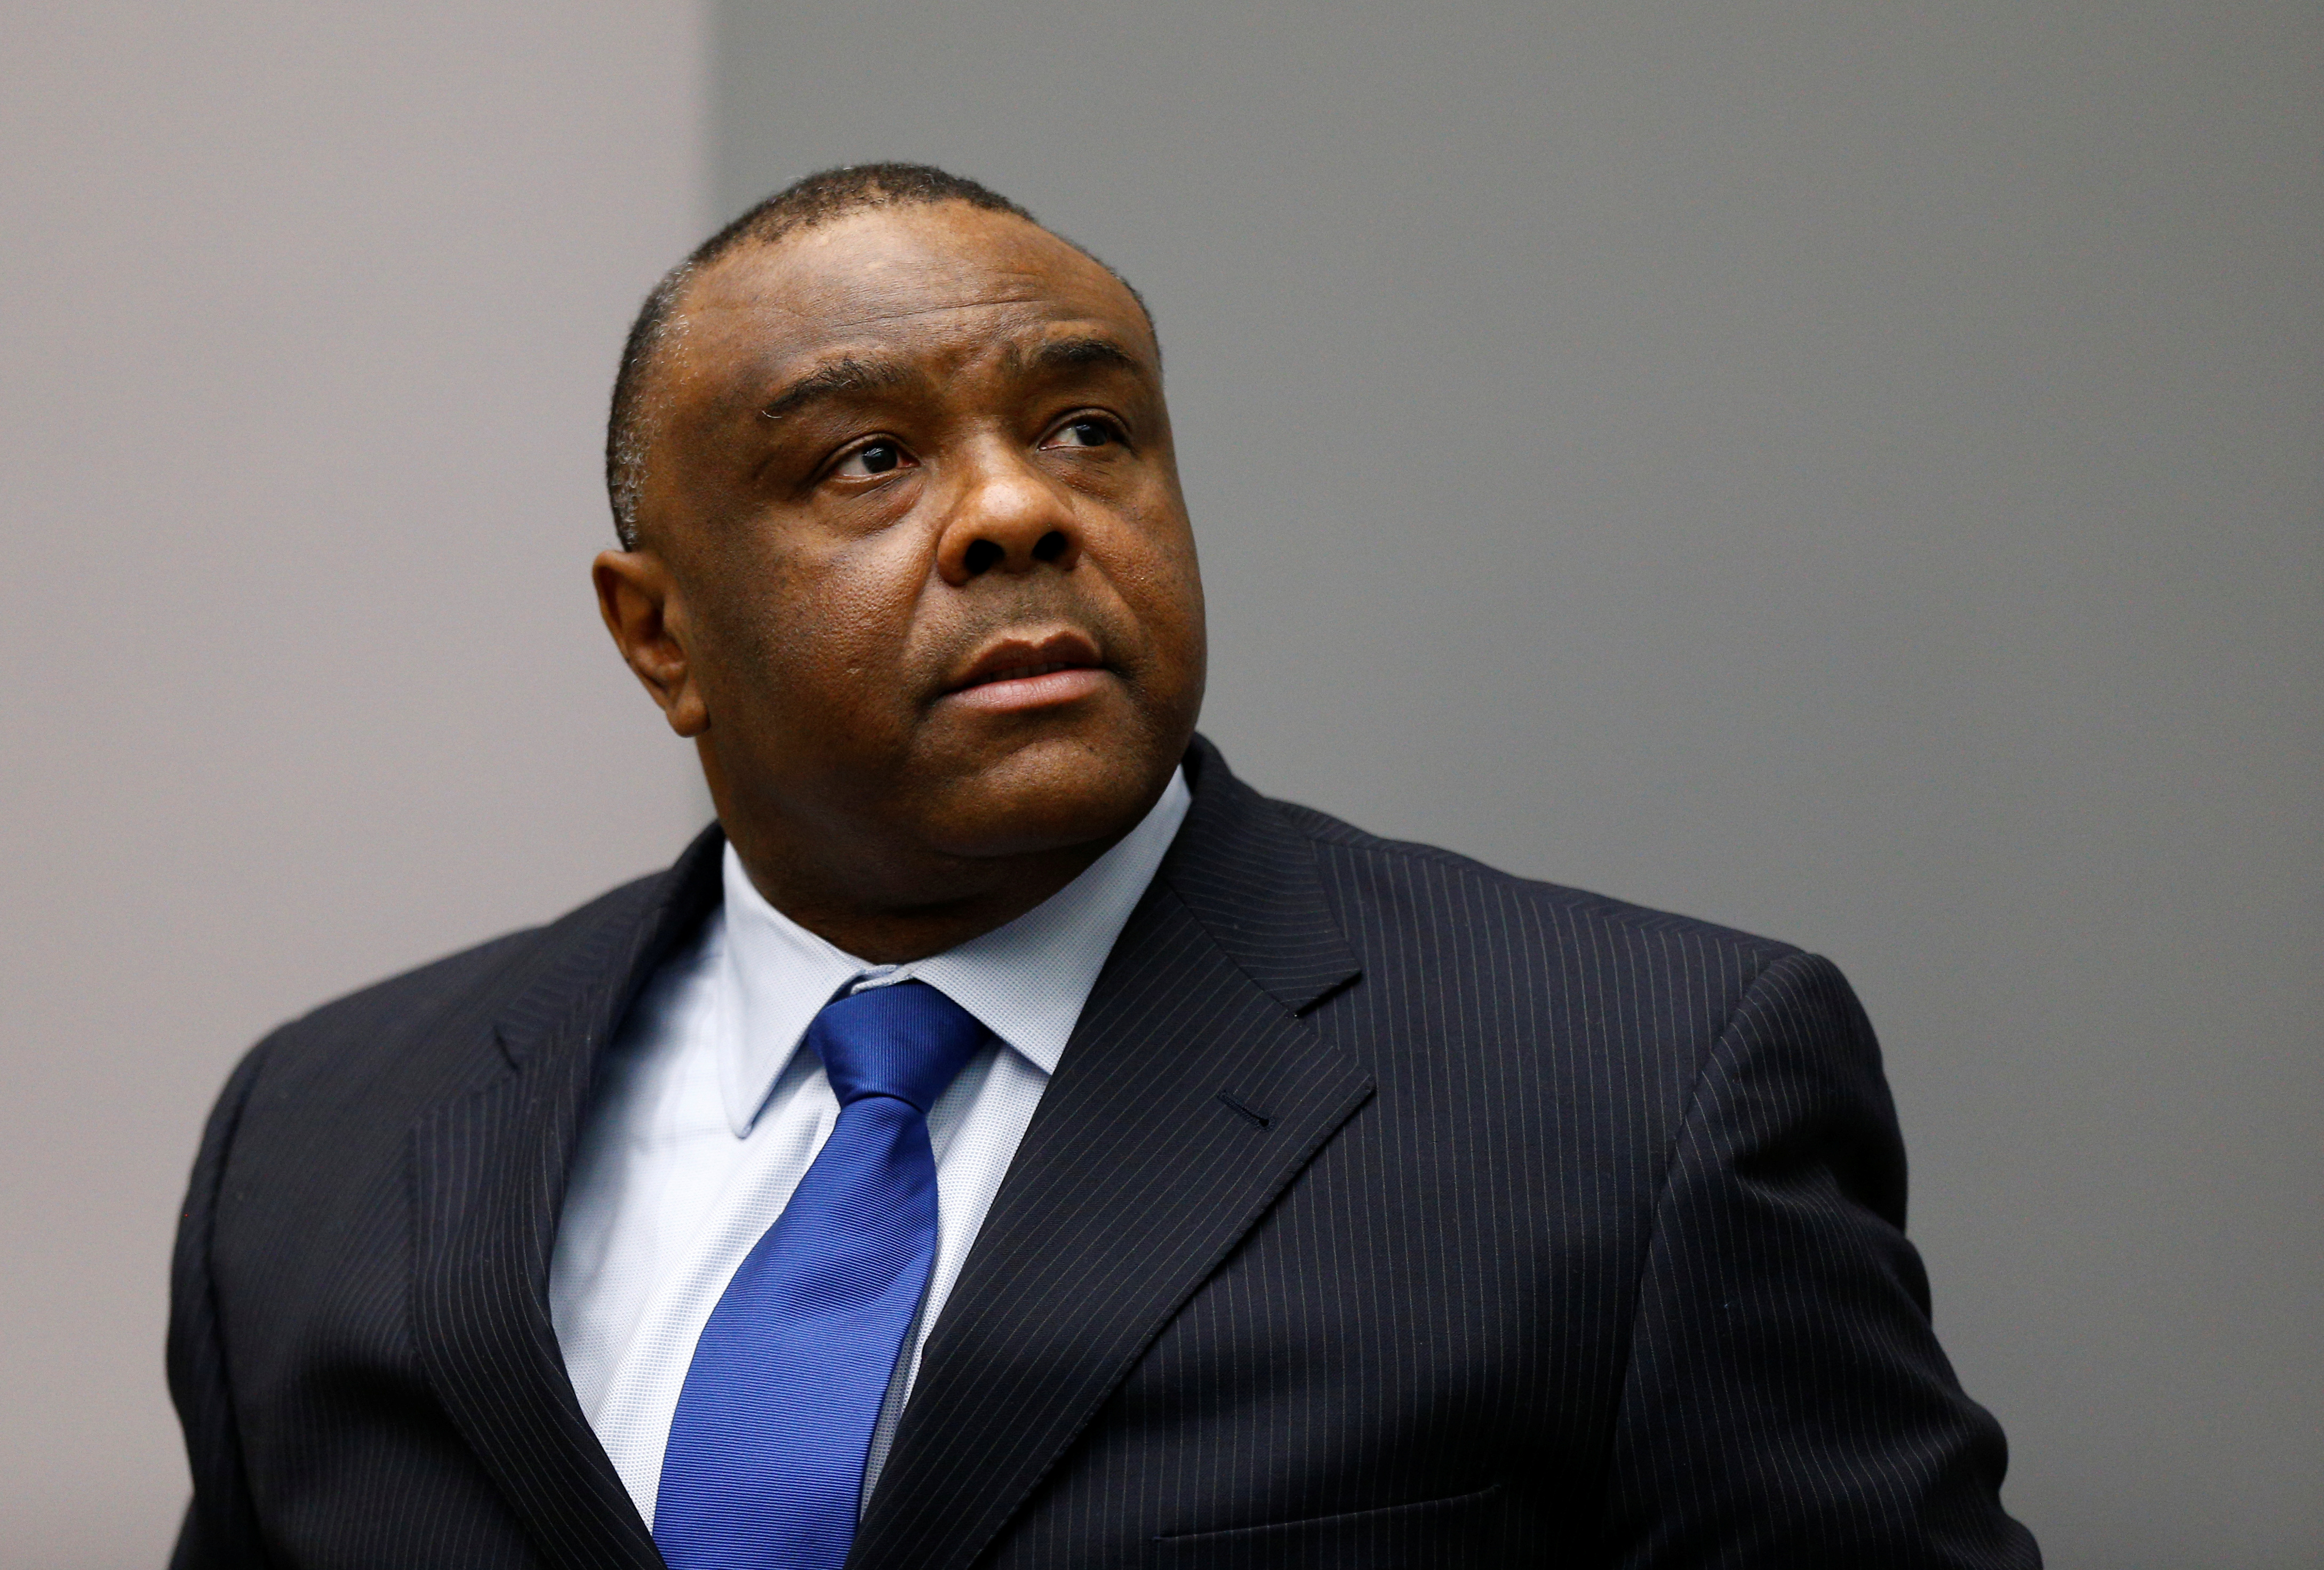 Jean-Pierre Bemba Gombo of the Democratic Republic of the Congo sits in the courtroom of the International Criminal Court (ICC) in The Hague